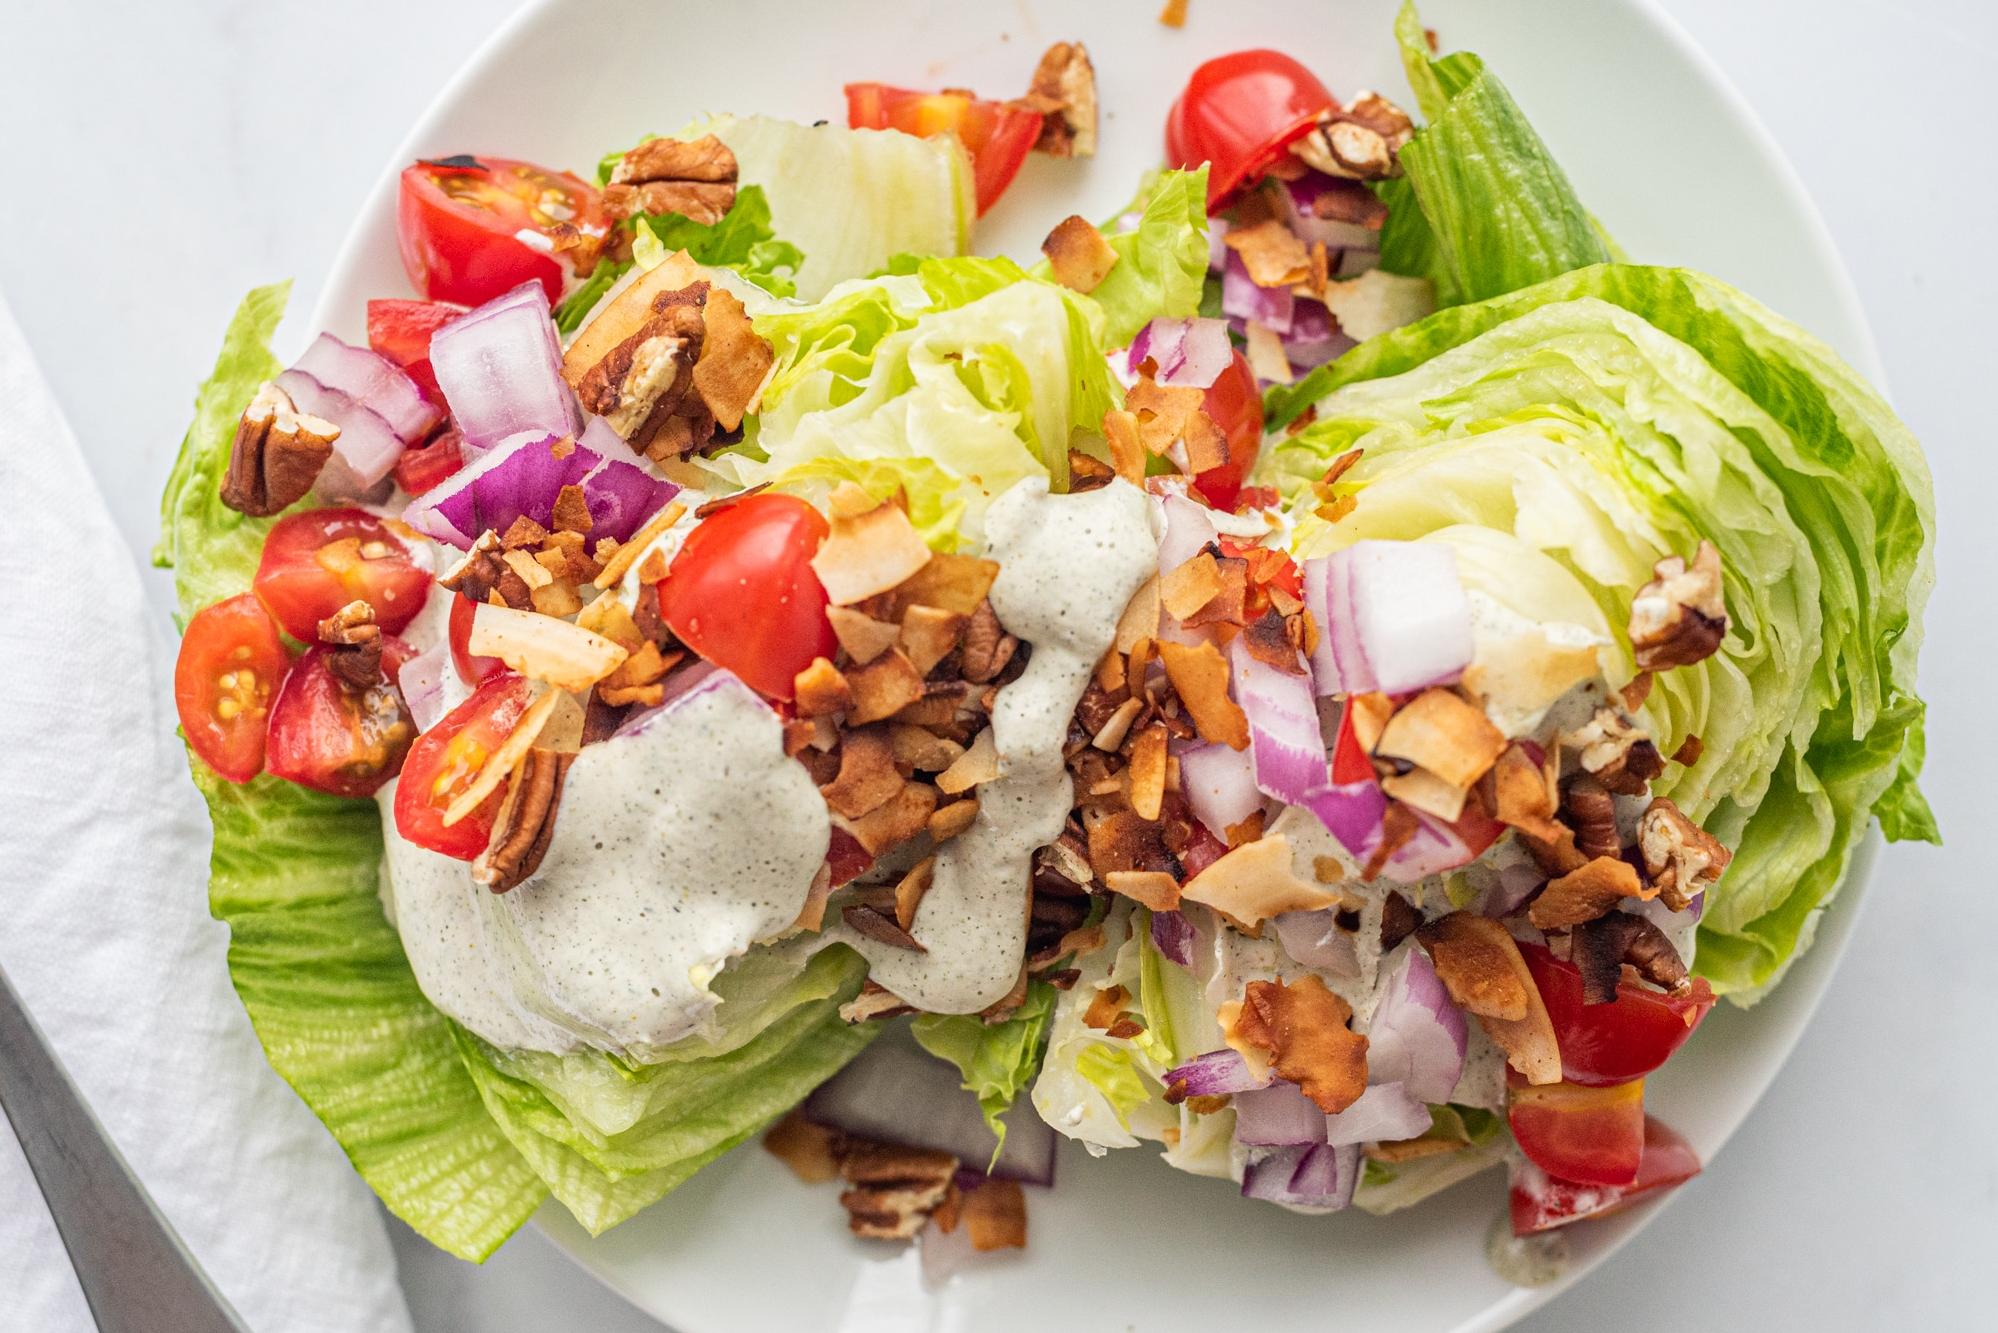  Who says salads can't be indulgent?